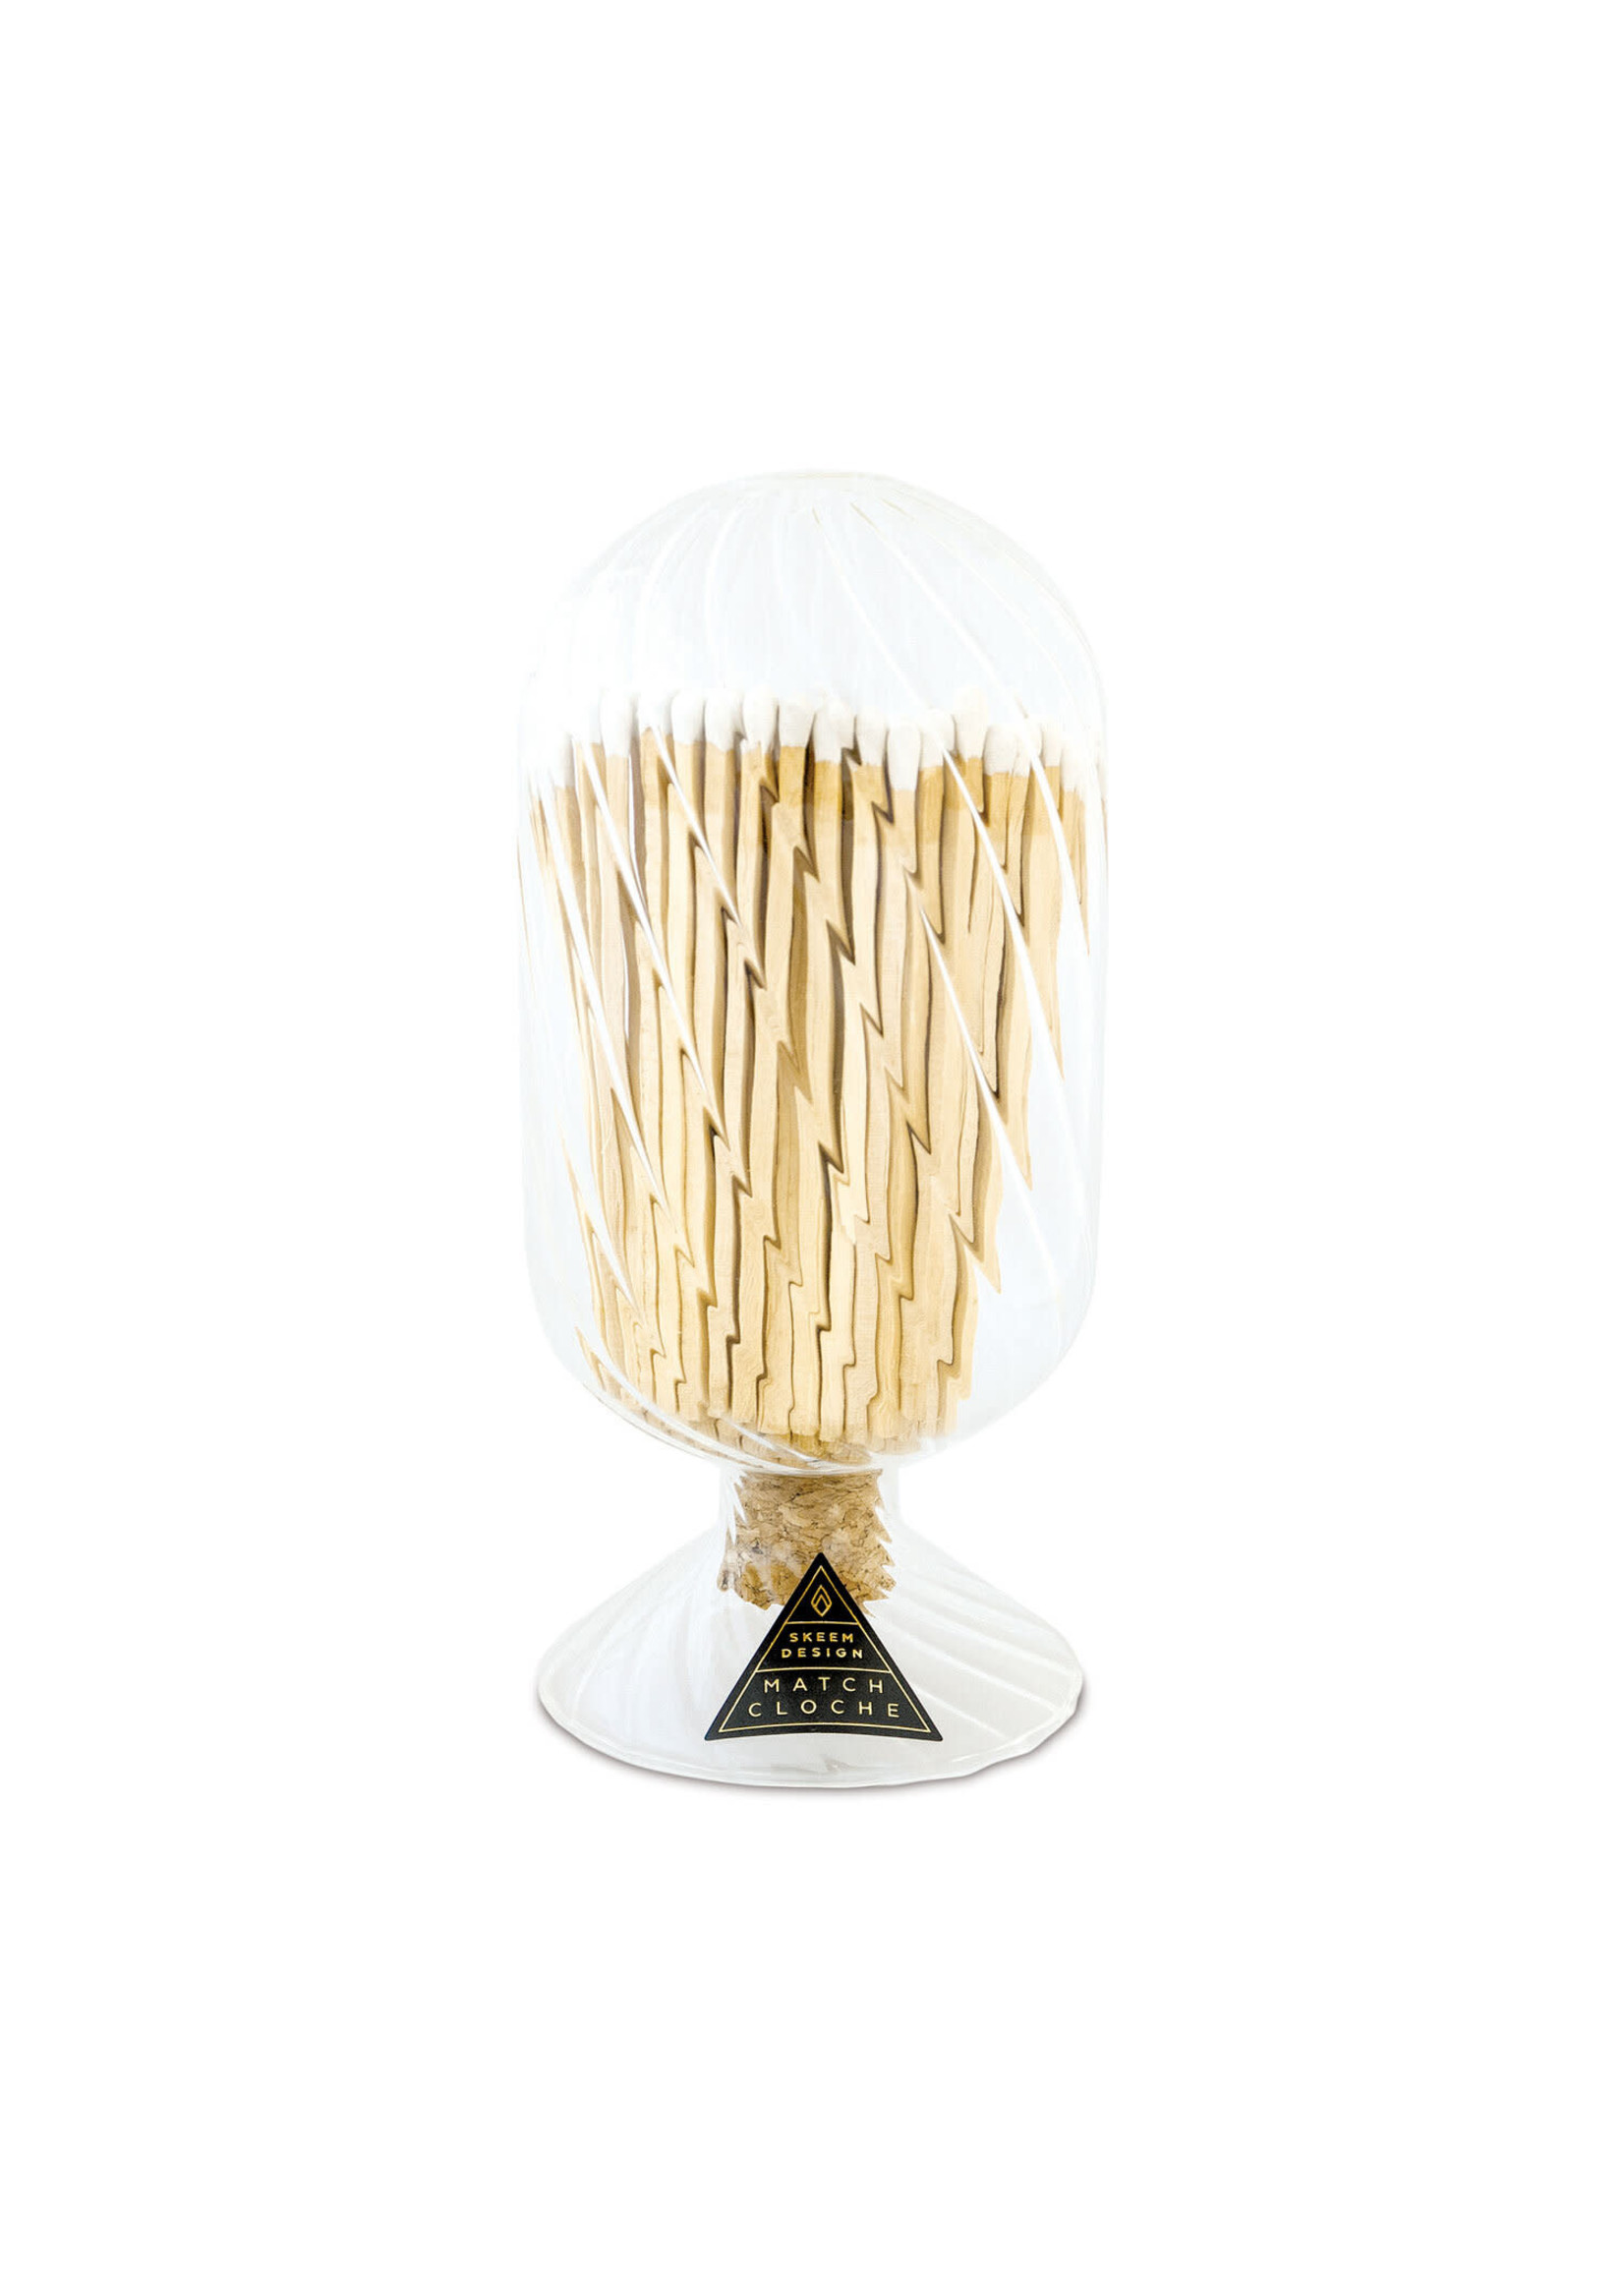 Ribbed Match Cloche - White Tips